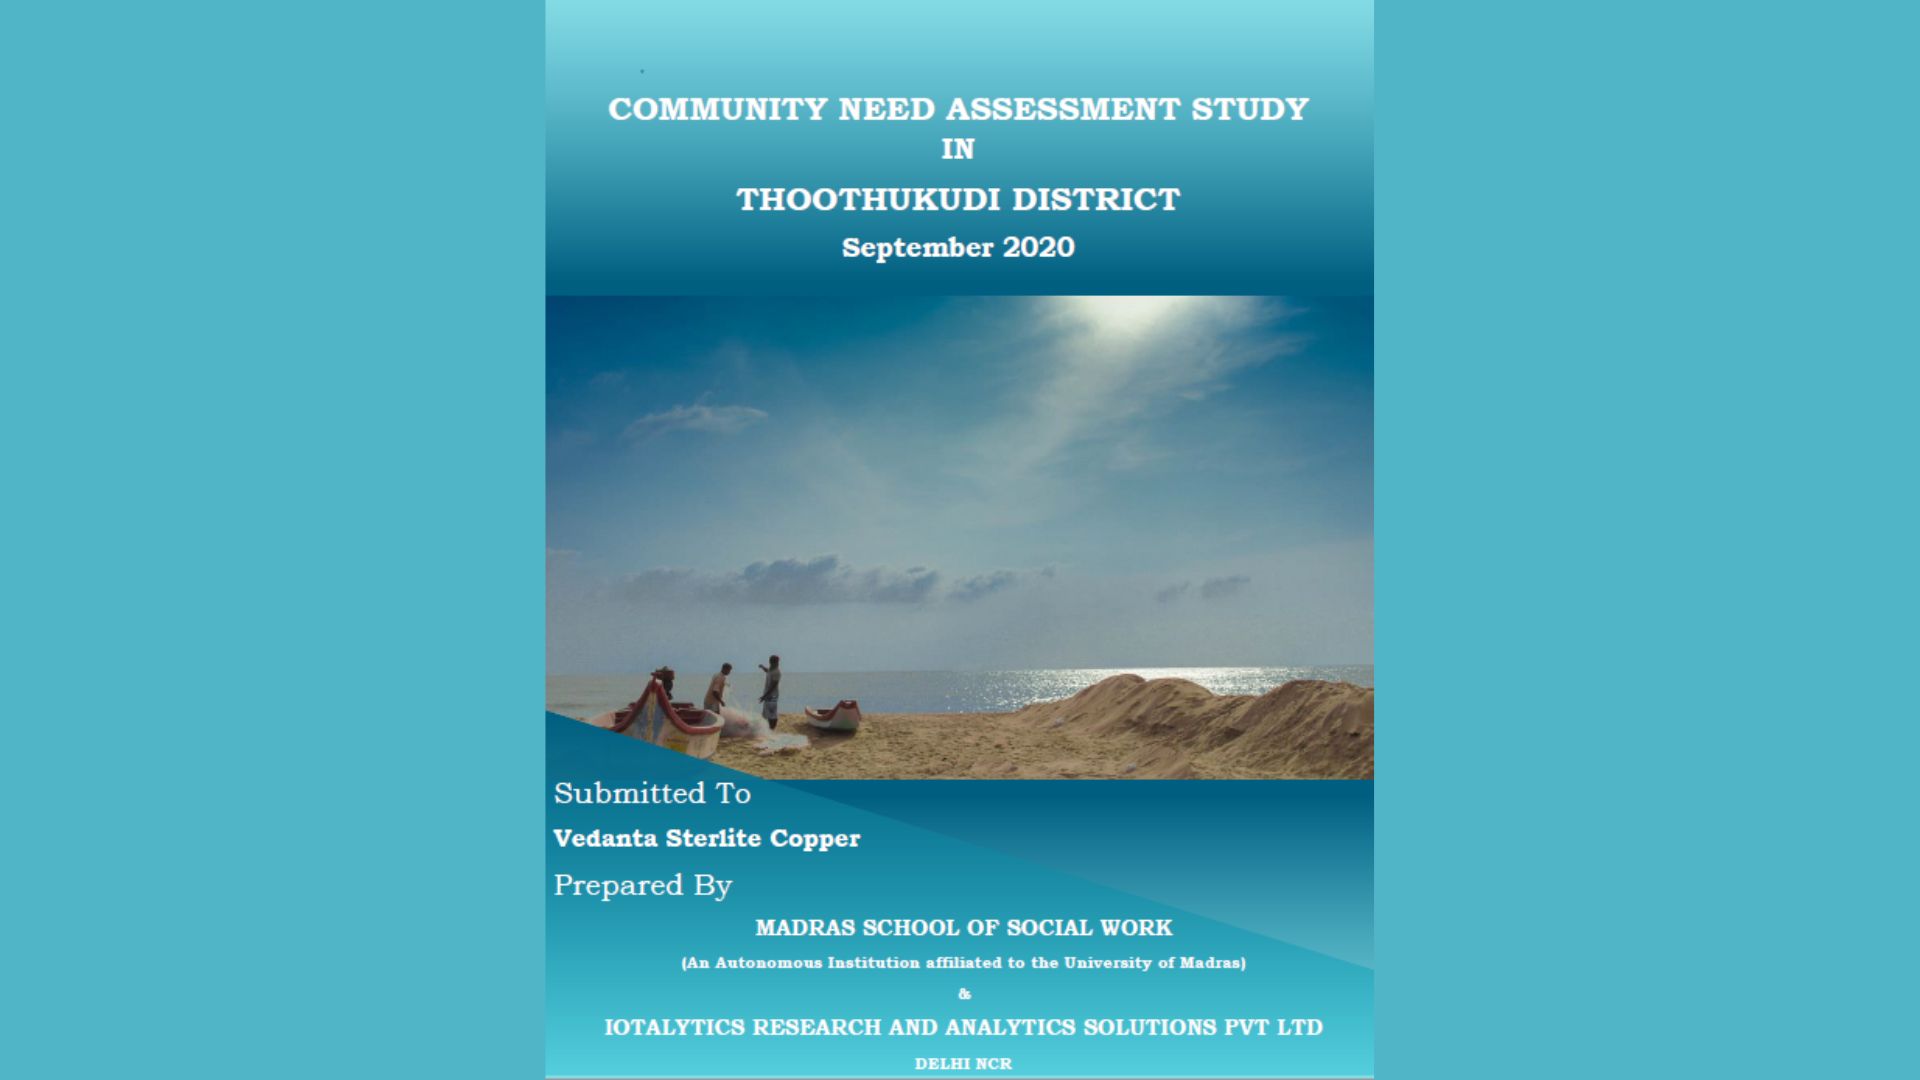 Community Need Assessment Study in Thoothukudi District